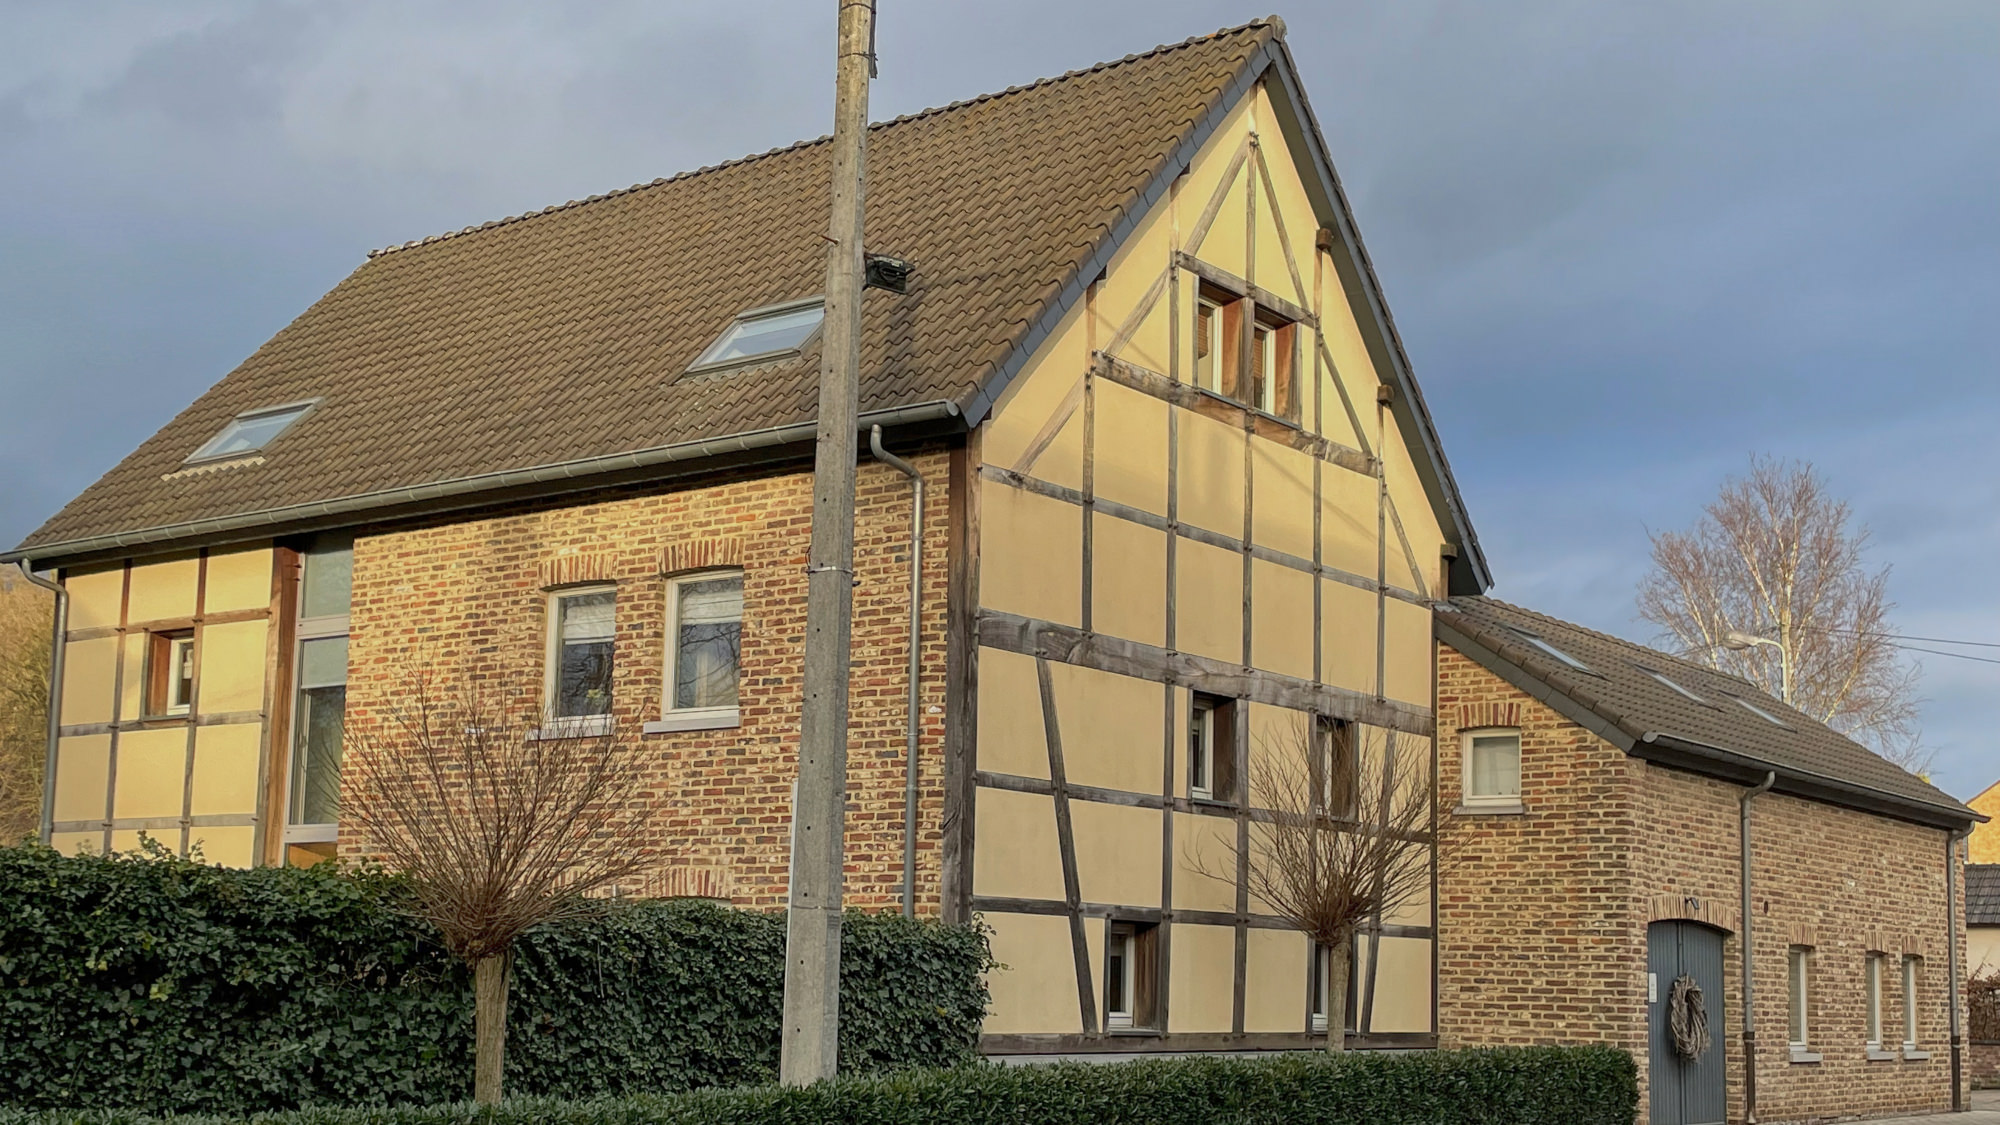 Front view of Het Maelhof, a half-timbered house.